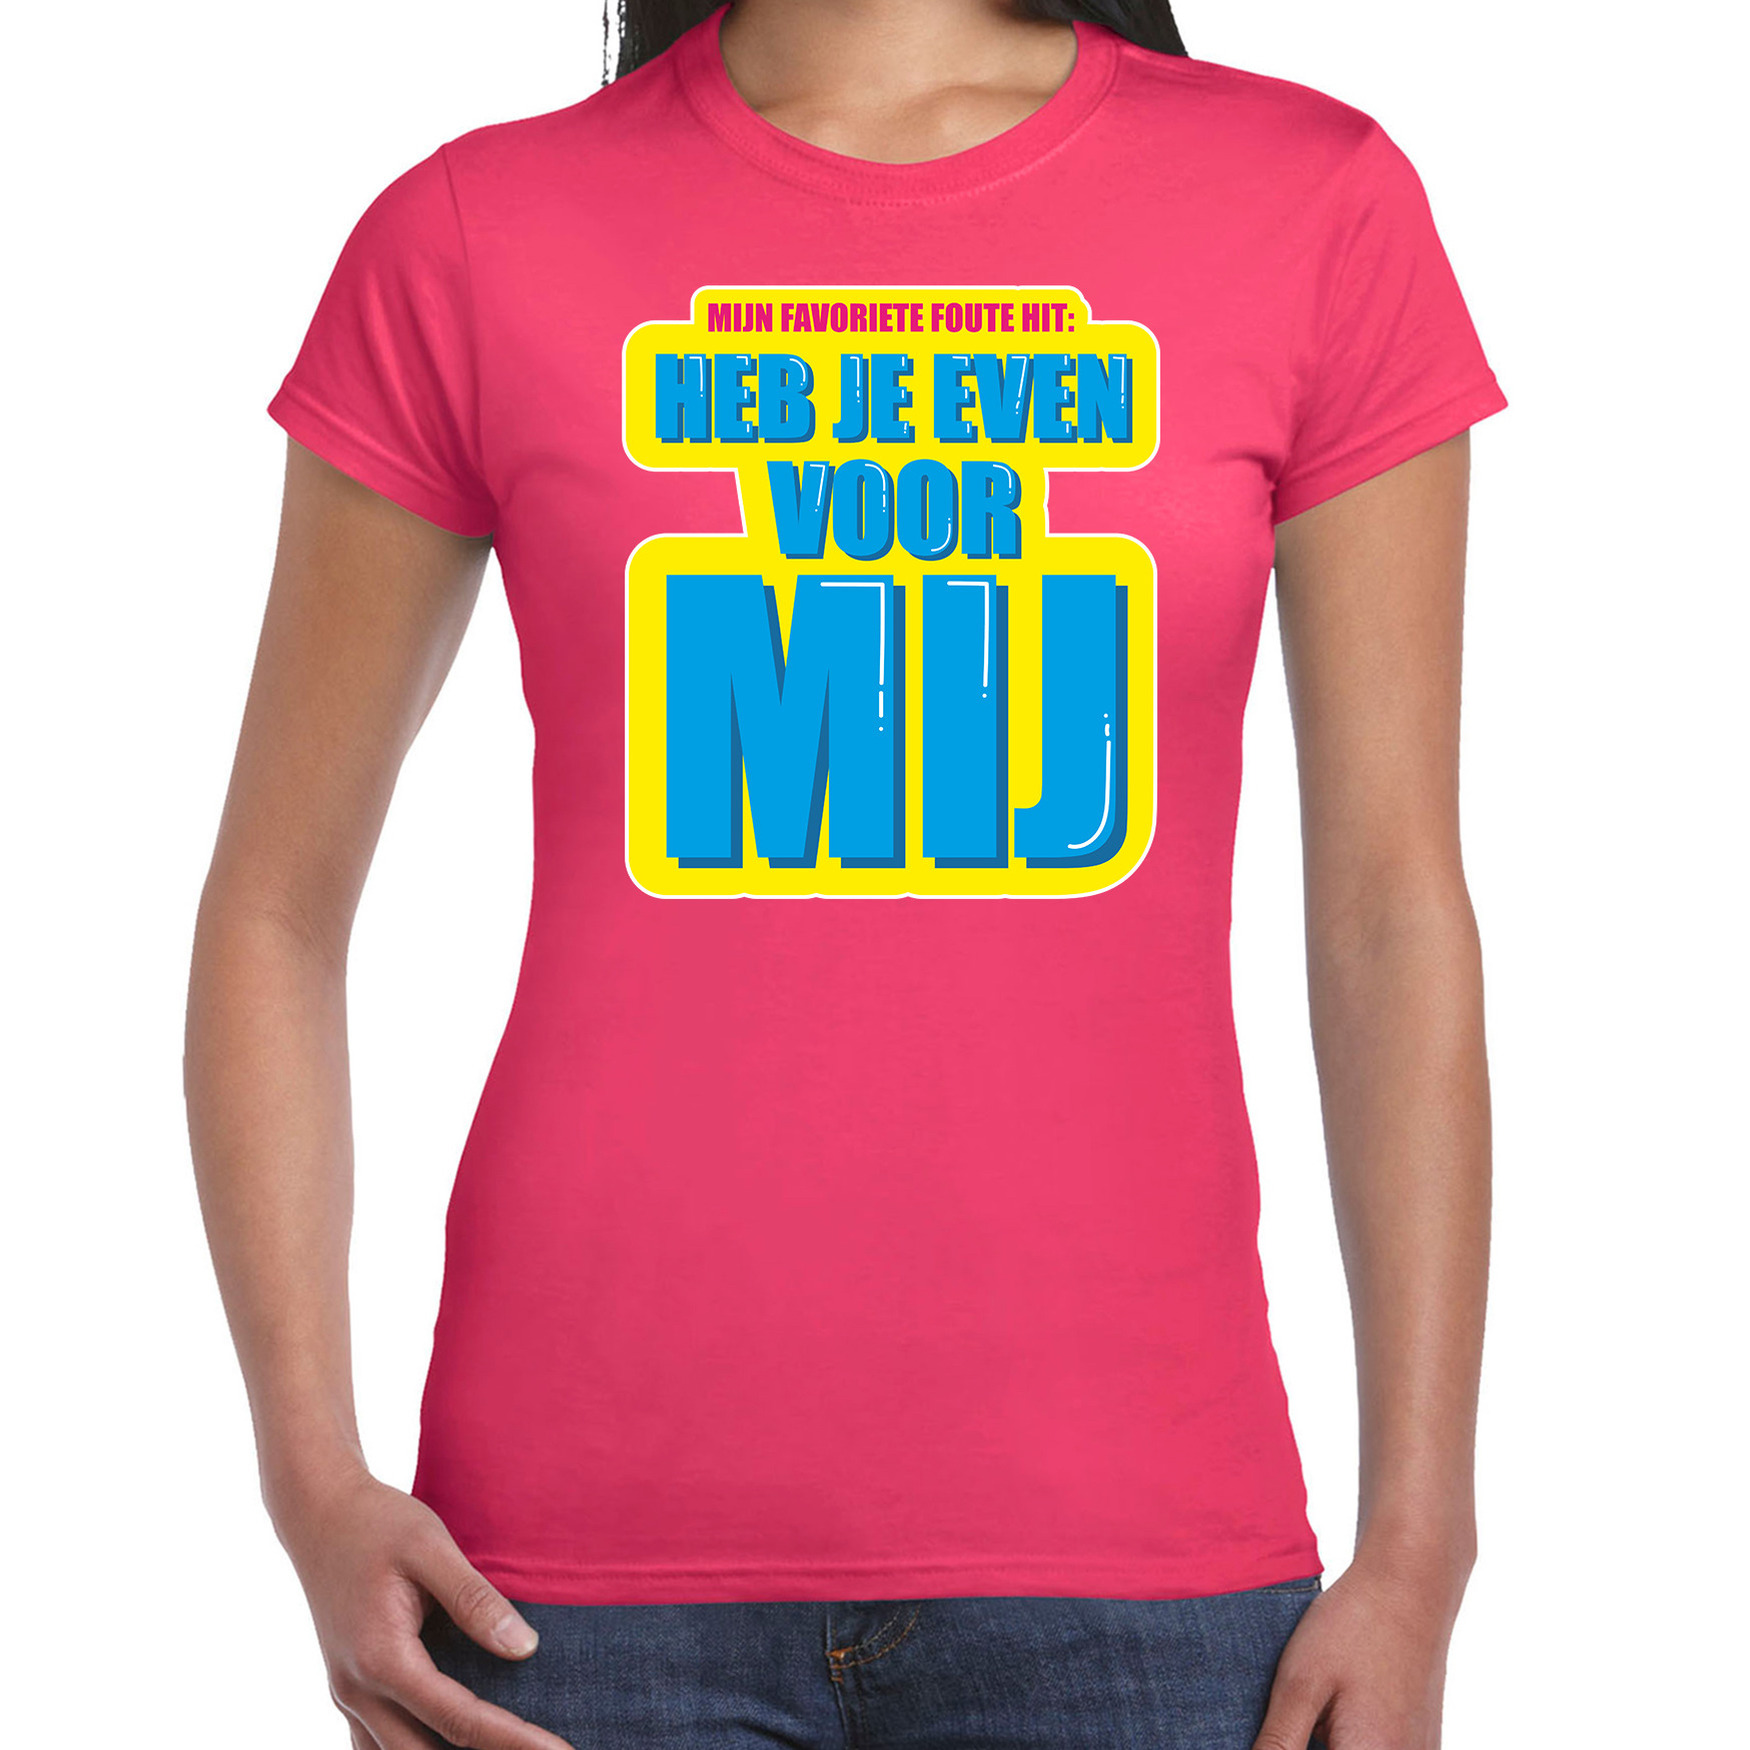 Foute party Heb je even voor mij verkleed t-shirt roze dames Foute party hits outfit- kleding